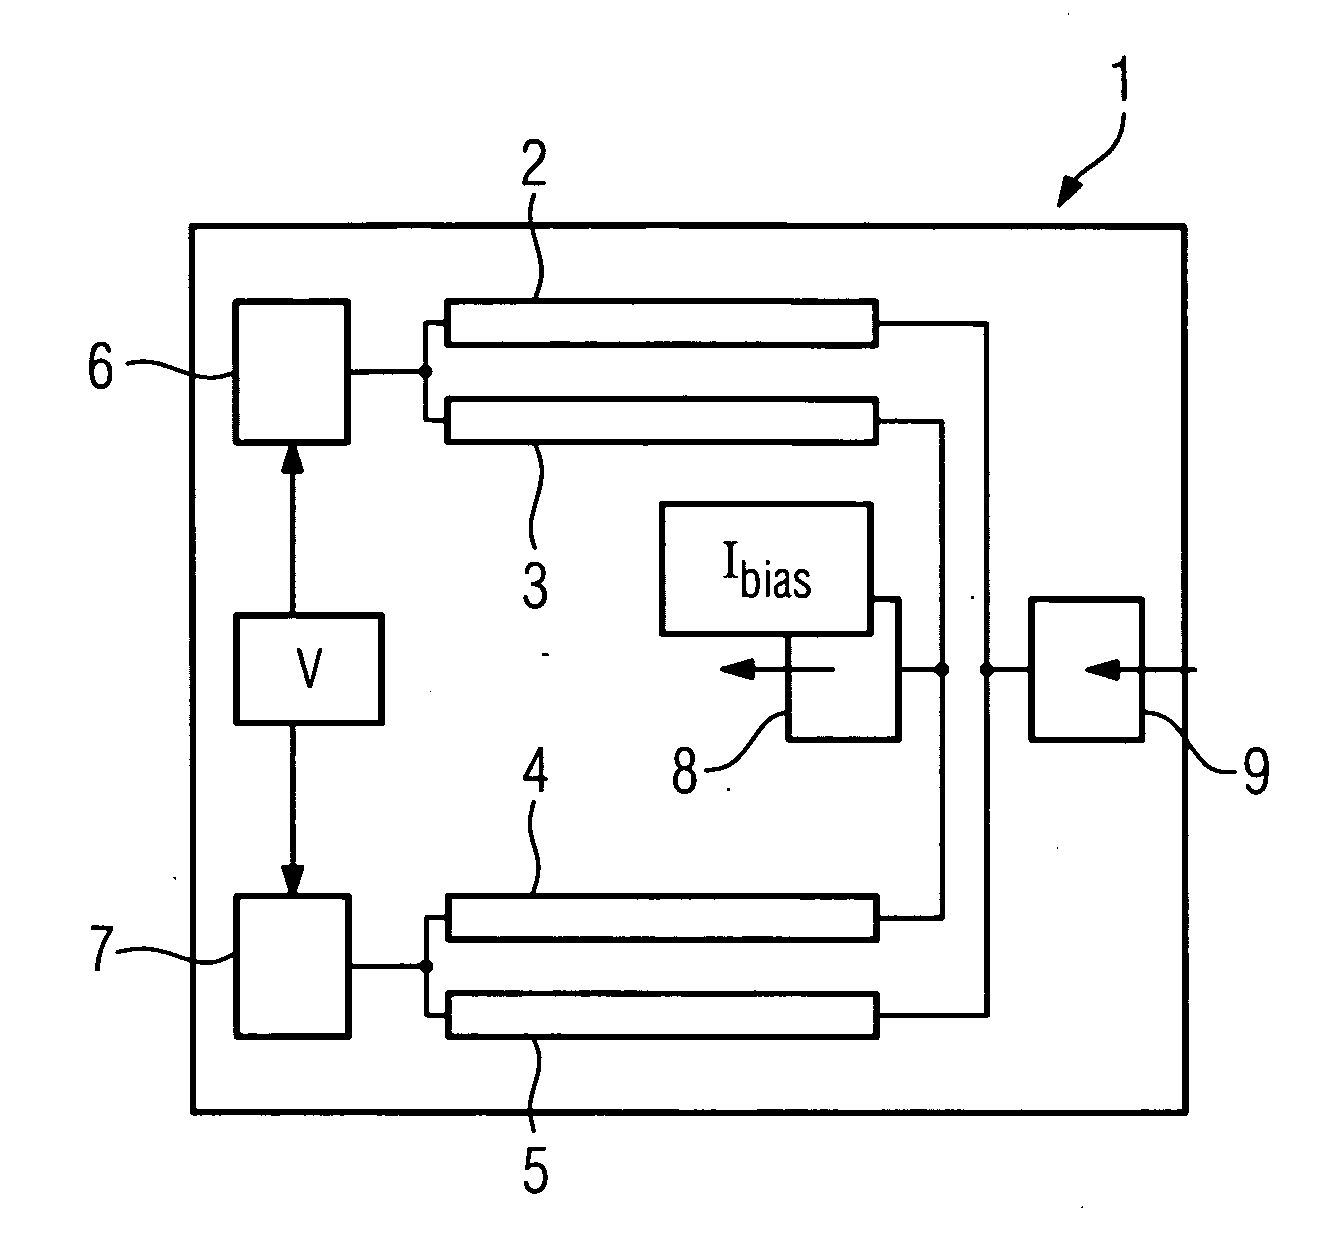 Device For Detecting Defects Which Are Deep And Close To The Surface In Electrically Conductive Materials In A Nondestructive Manner